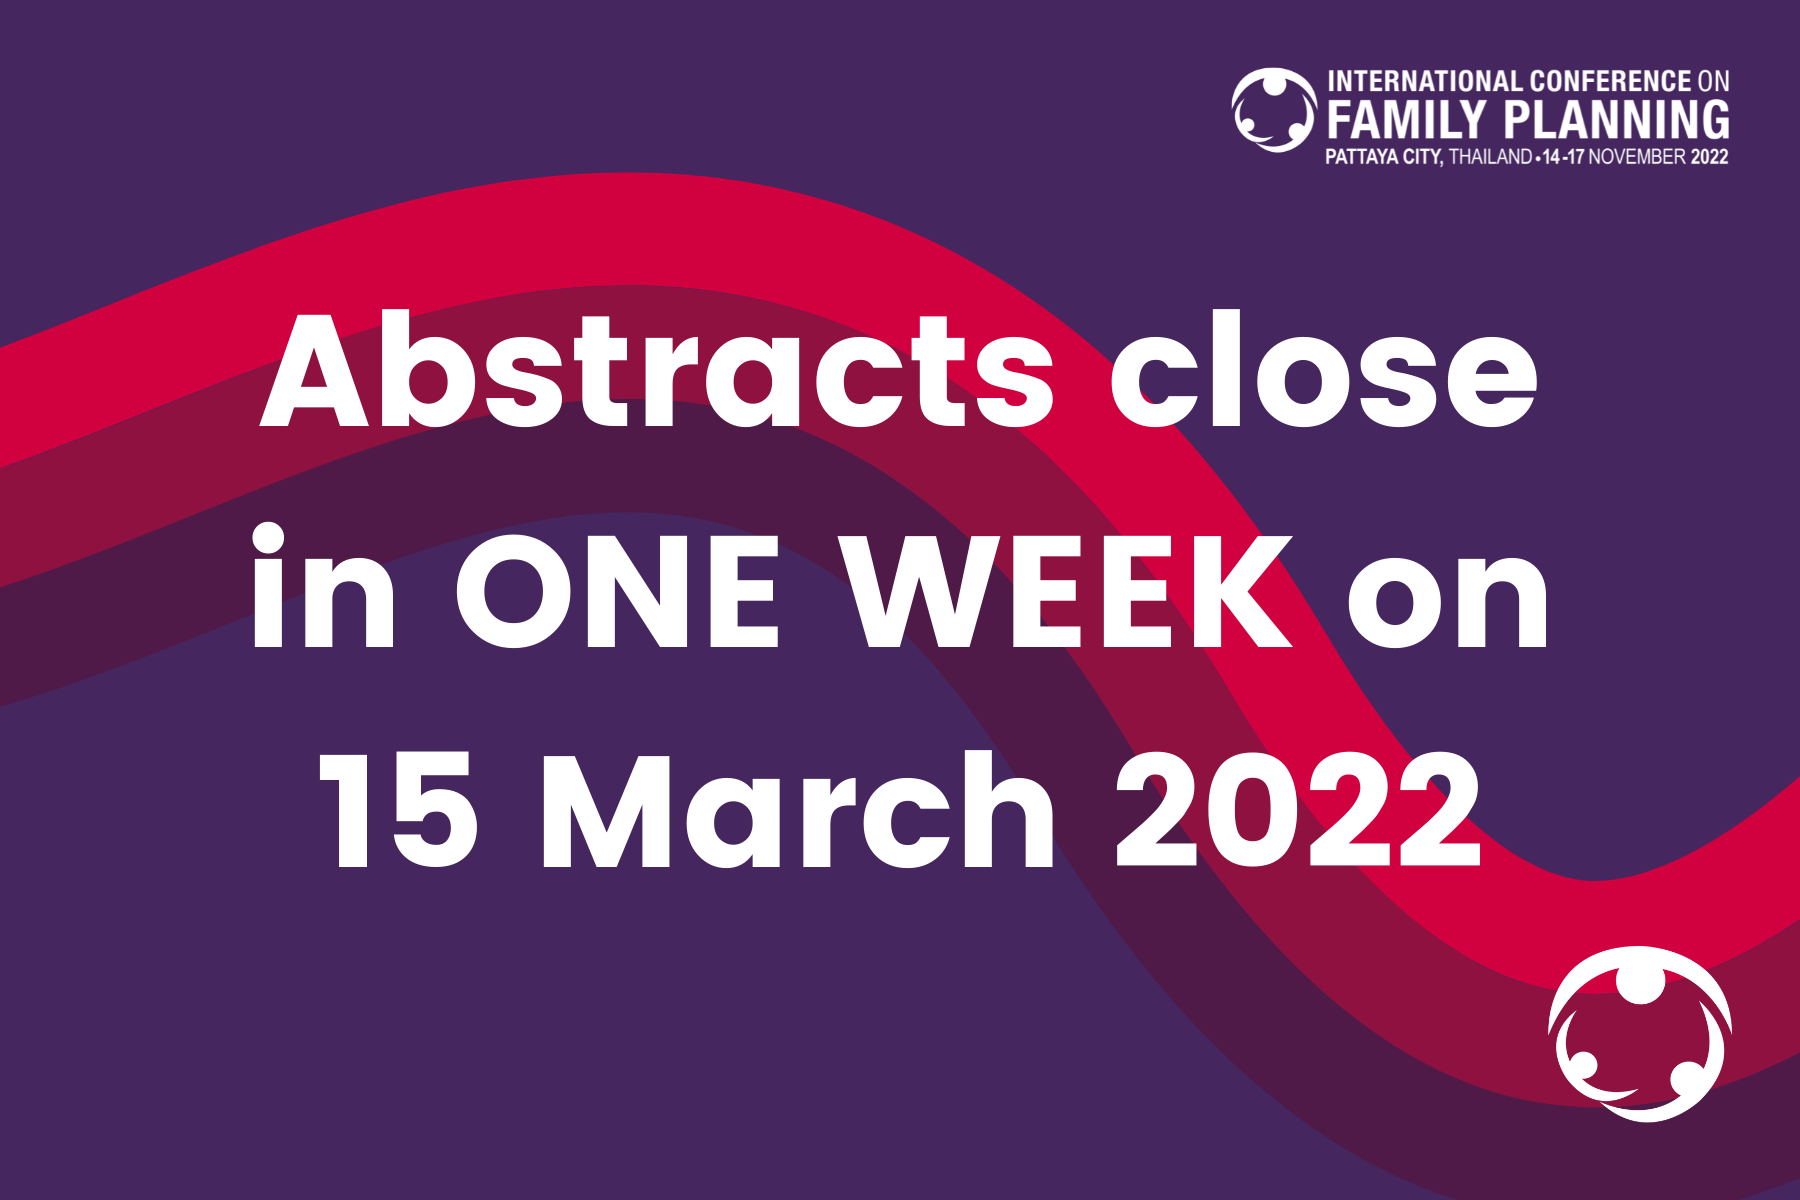 Abstracts Due in One Week: Deadline 15 March